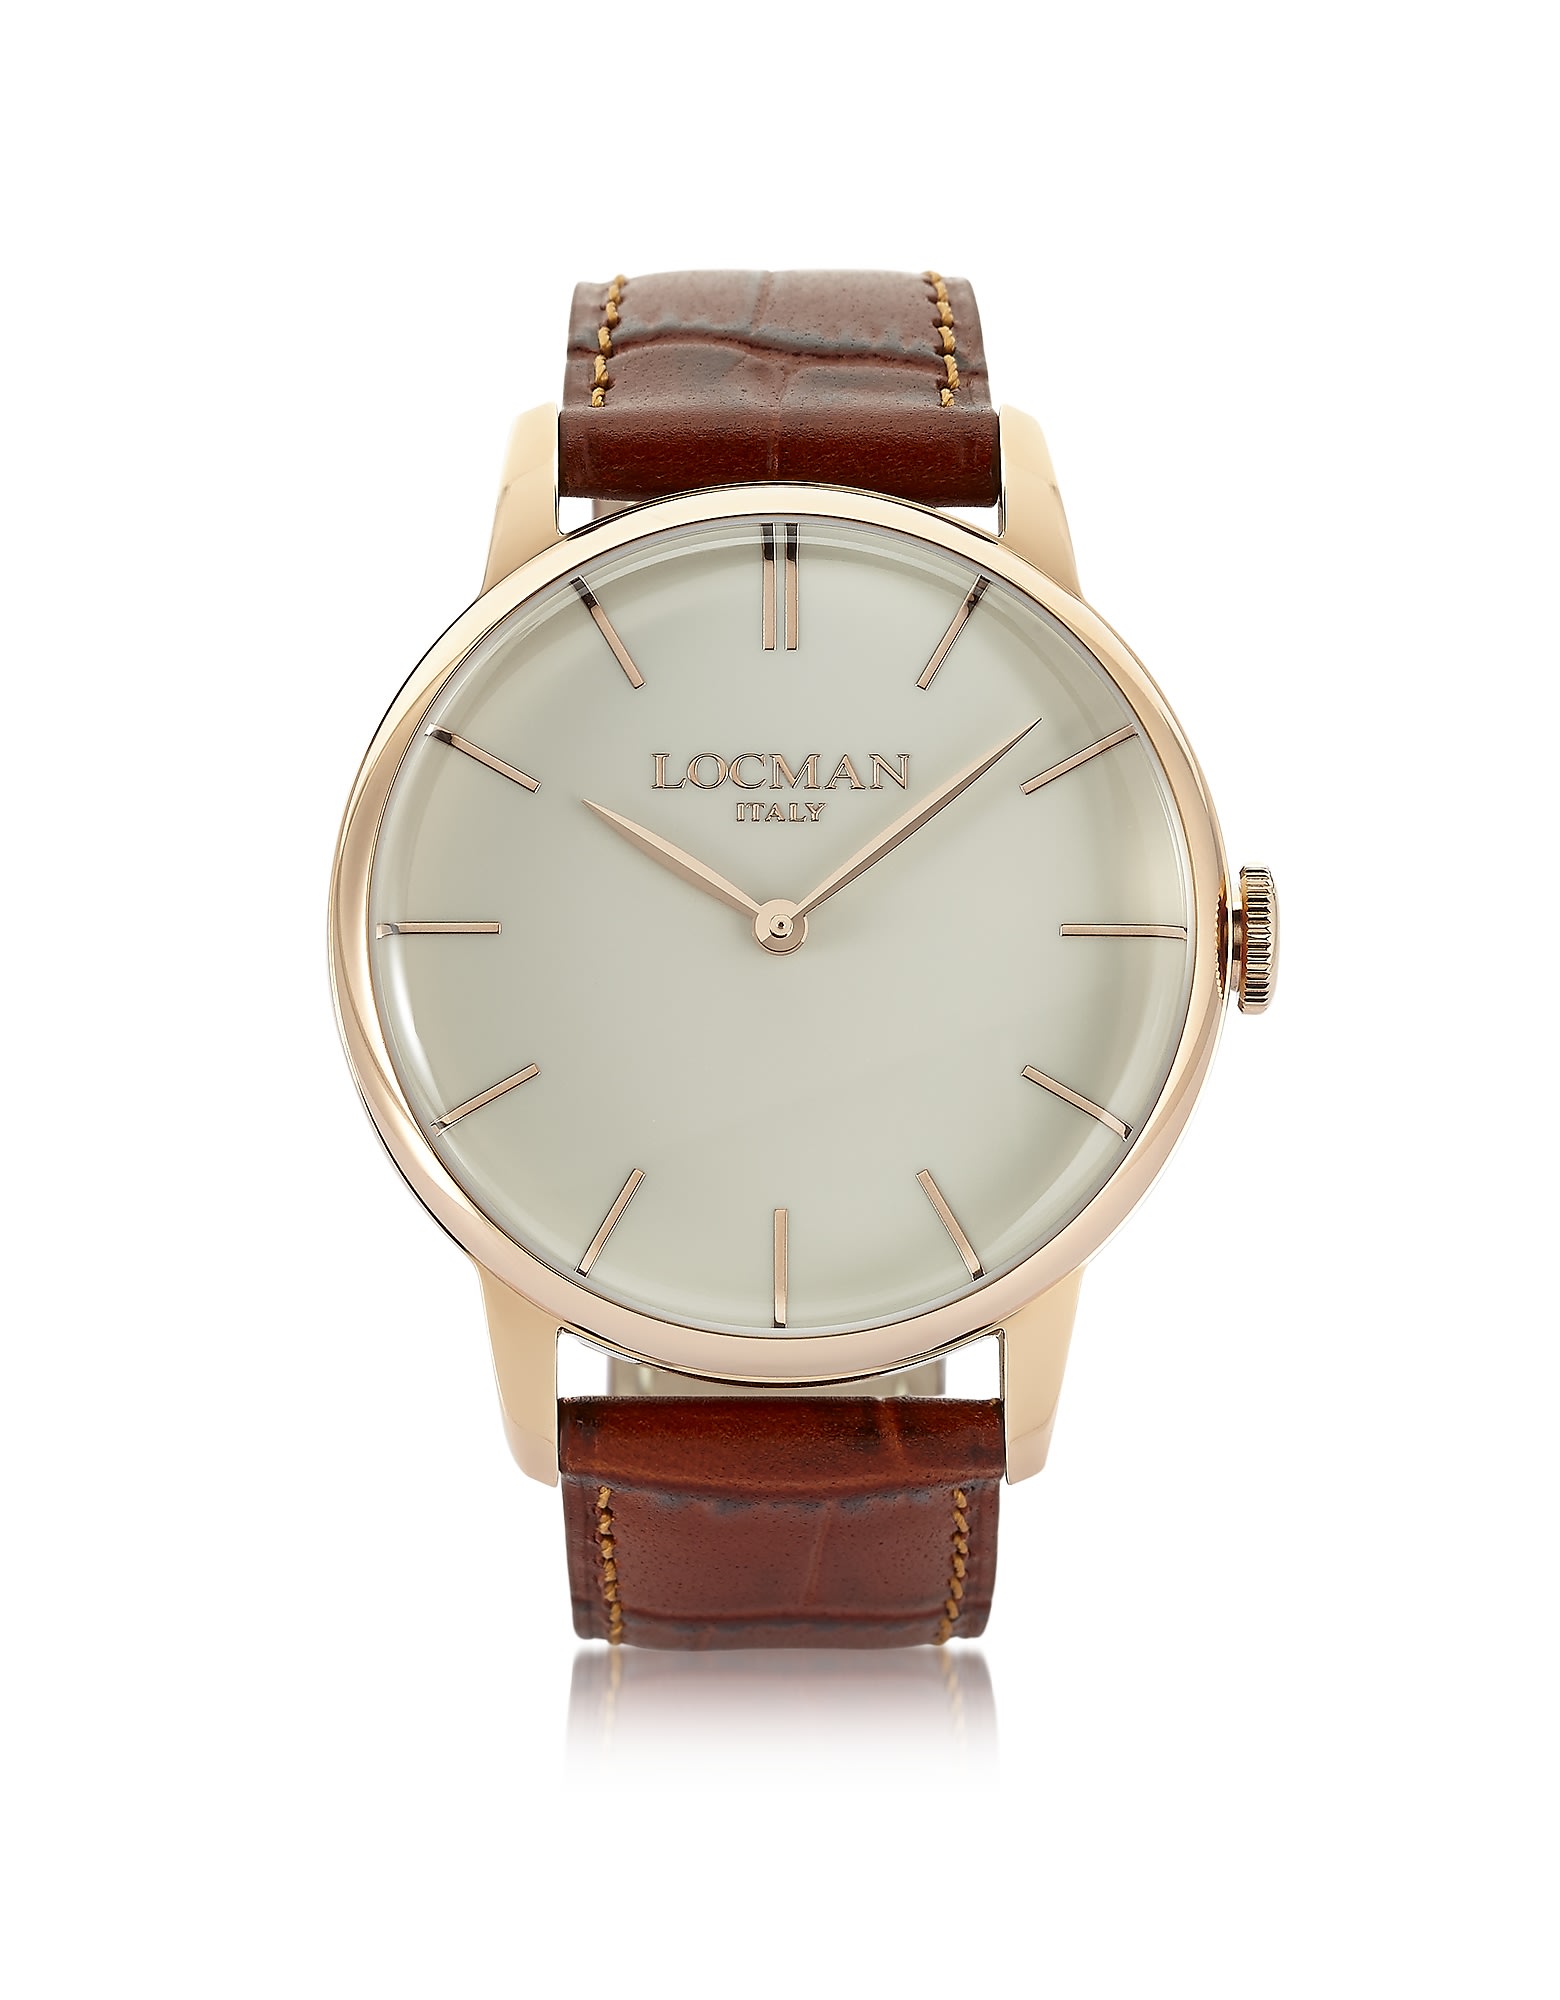 Locman 1960 Rose Gold Pvd Stainlees Steel Mens Watch W/brown Croco Leather Strap